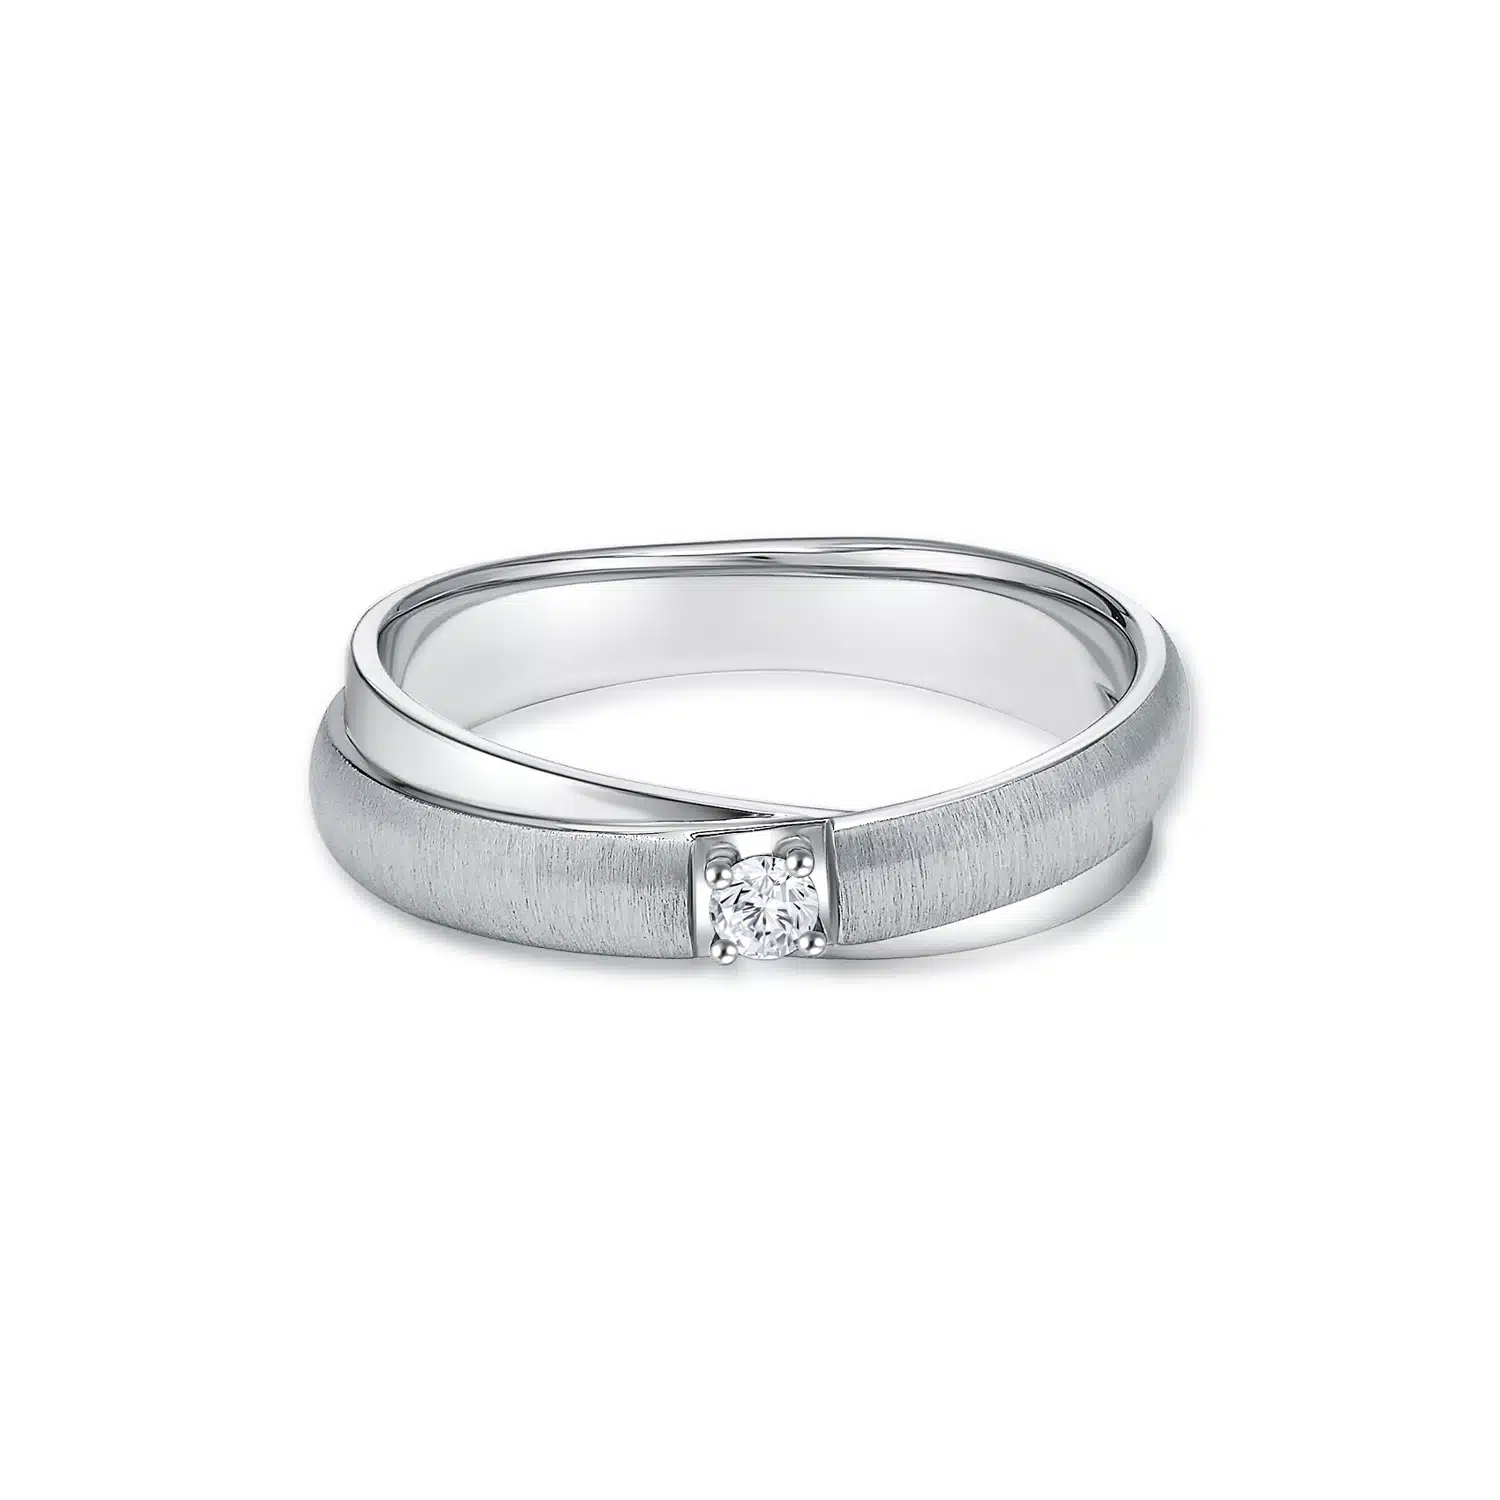 MOMENTO INTERWINED where two individuals' lives intertwine WHITE GOLD WEDDING BAND